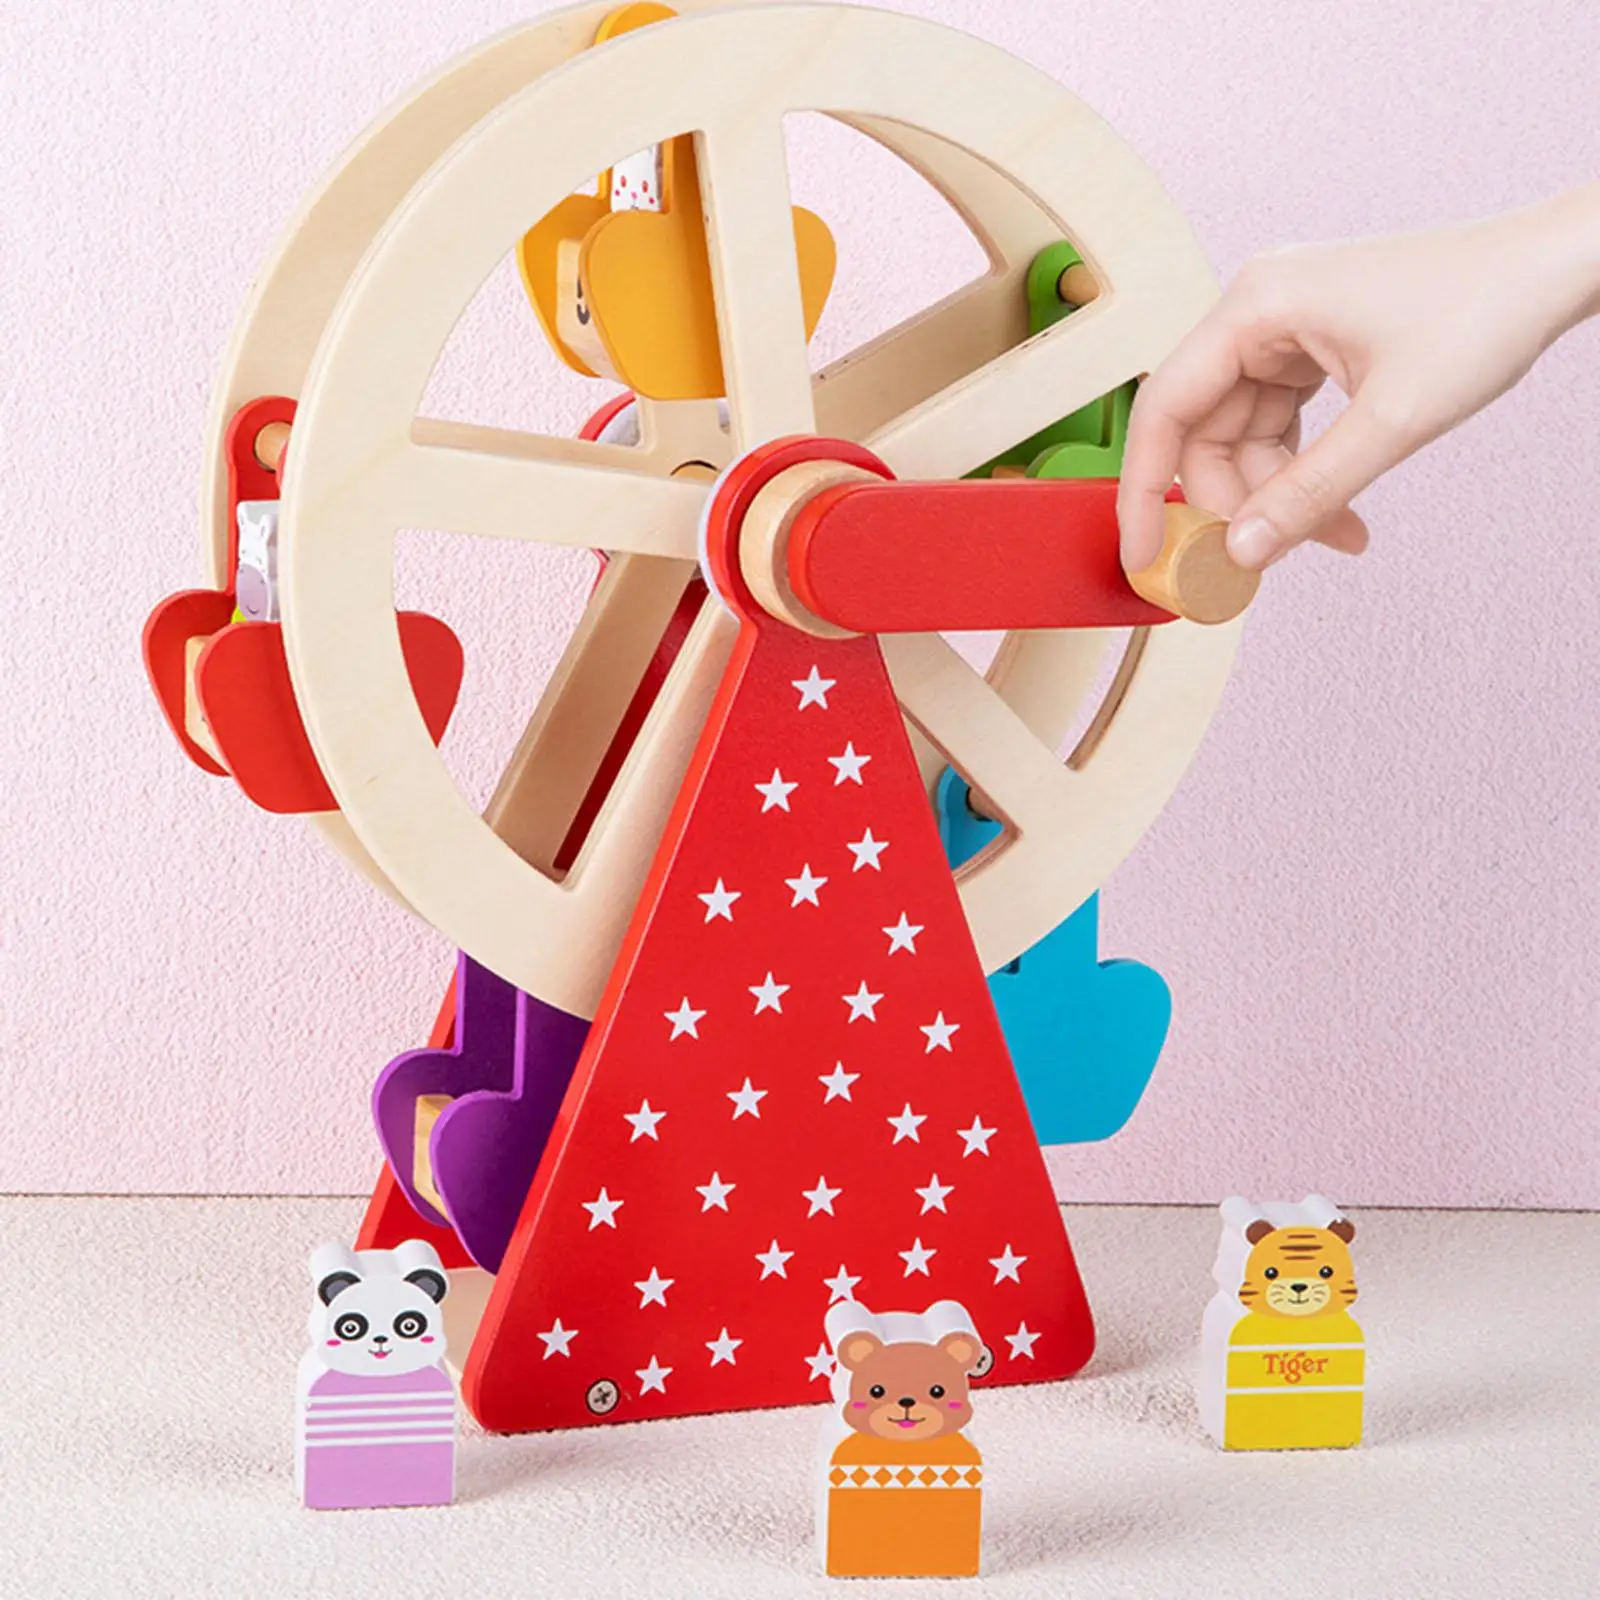 Kids Rotating Wheel Toys Assembly W/ Animal Blocks 3D W/ Handle Handheld DIY Colorful  for 3+ Years Old Infant  Gifts